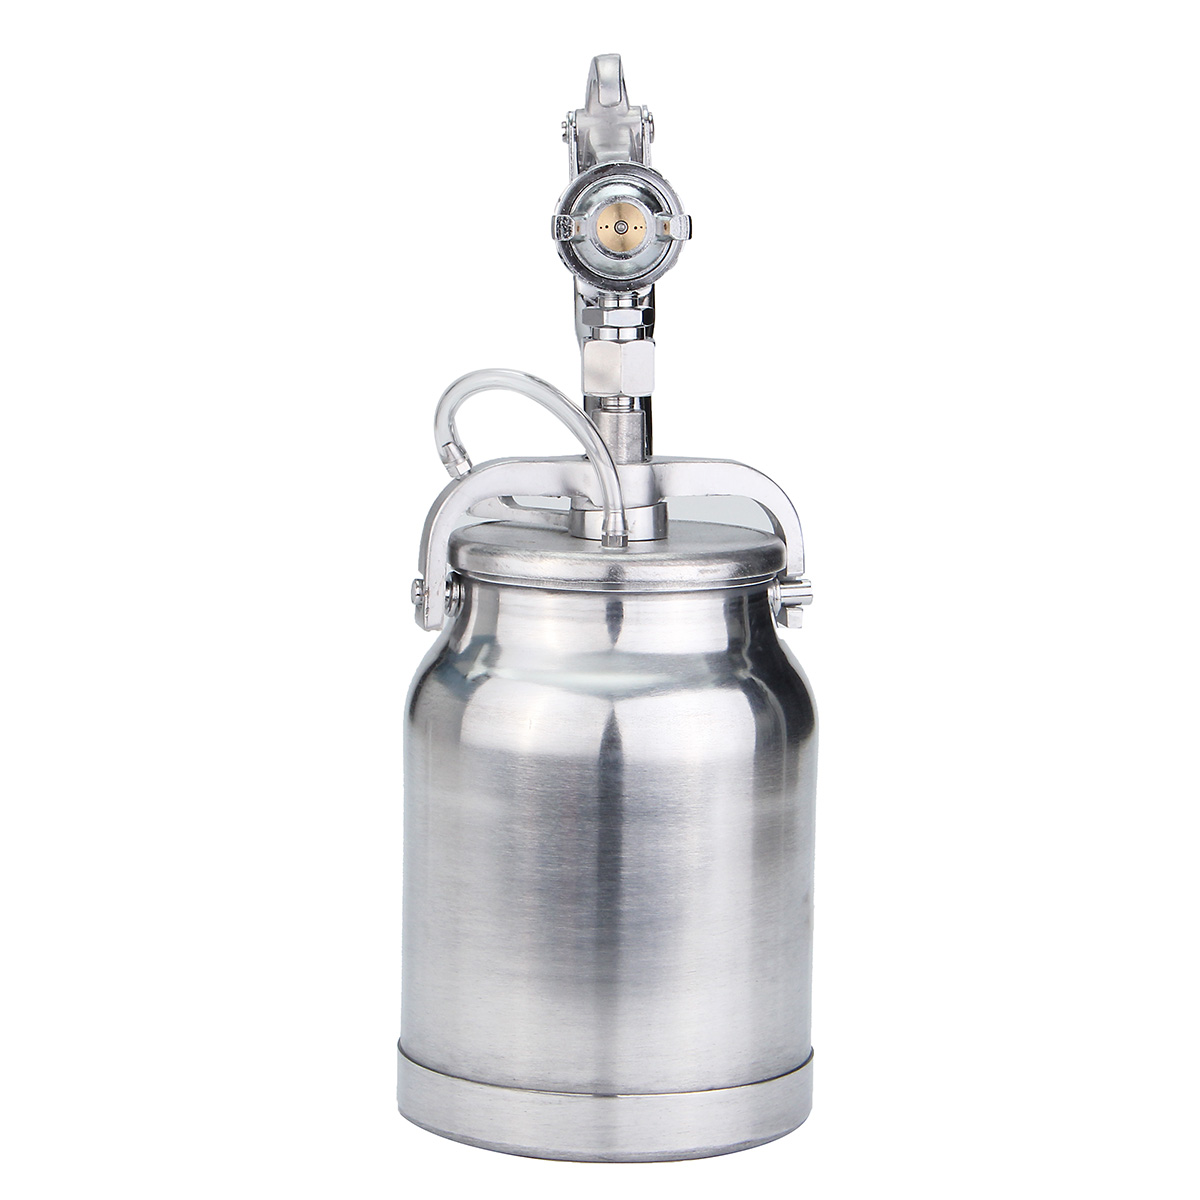 3-In-1-Suction-Feed-Heavy-Duty-Paint-Spray-Sprayer-1L-Pot-14Inch-Air-Hose-Fitting-1264292-3